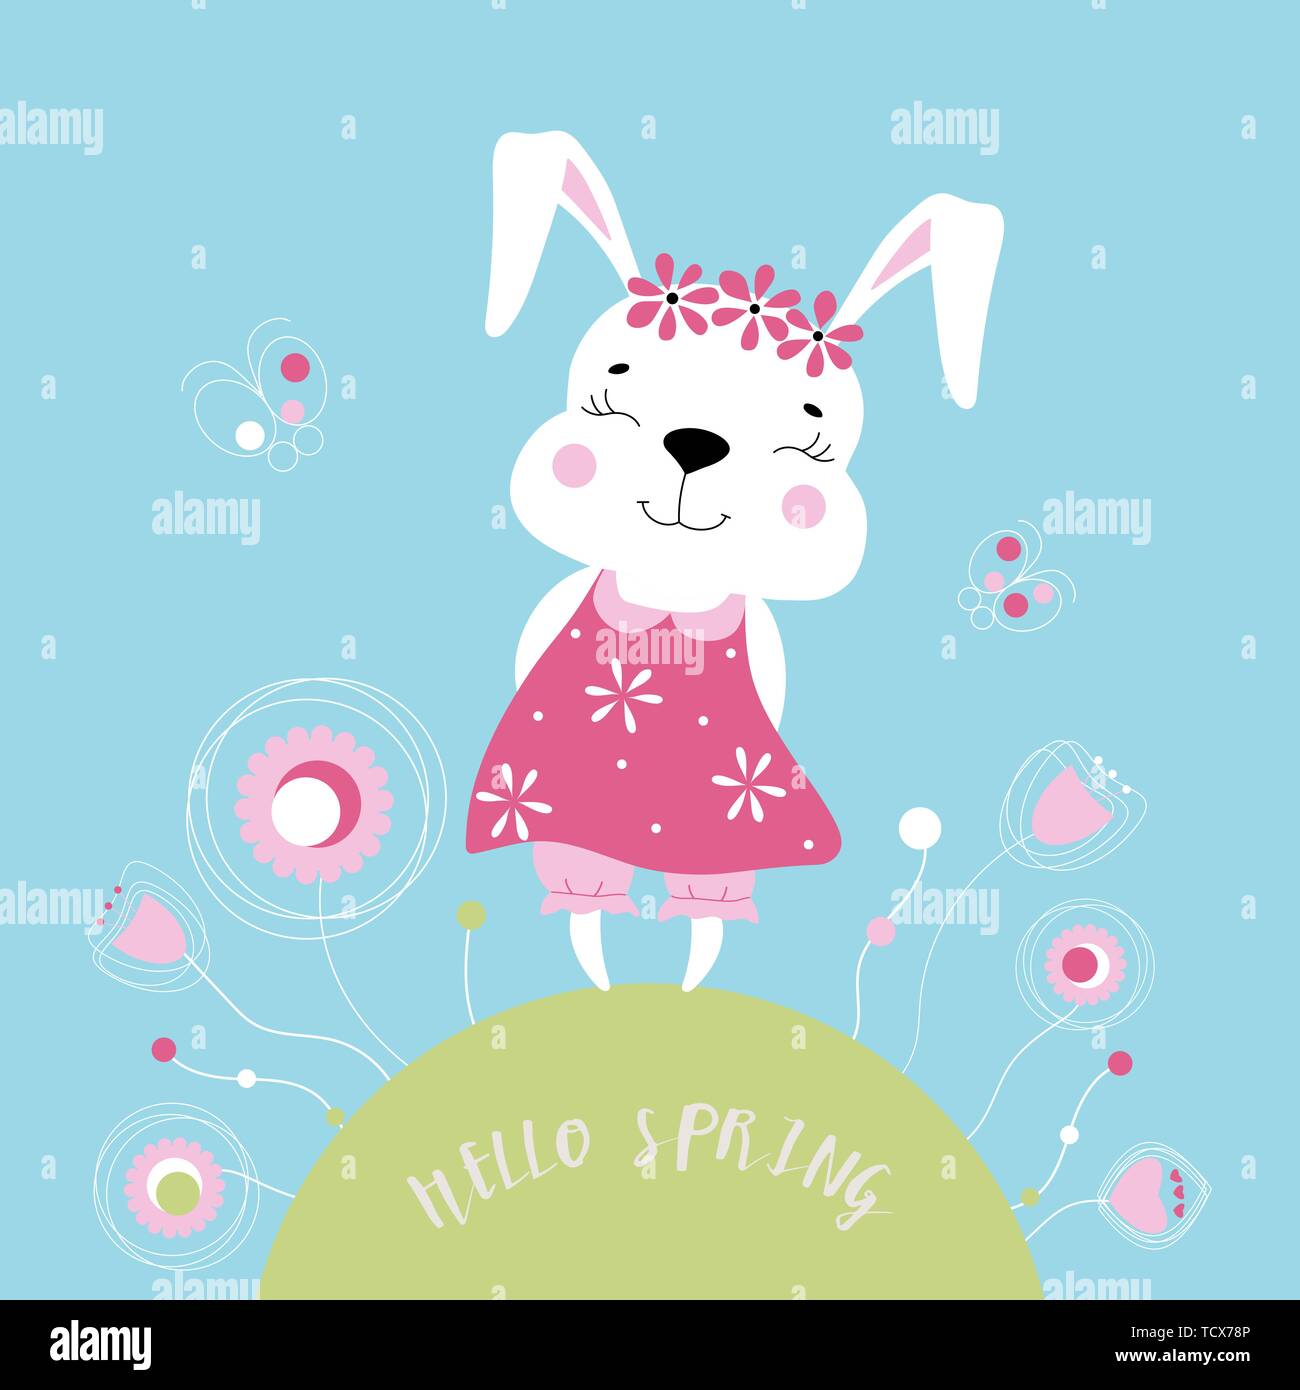 Easter theme with cute bunny and butterflies flying above grass and ...